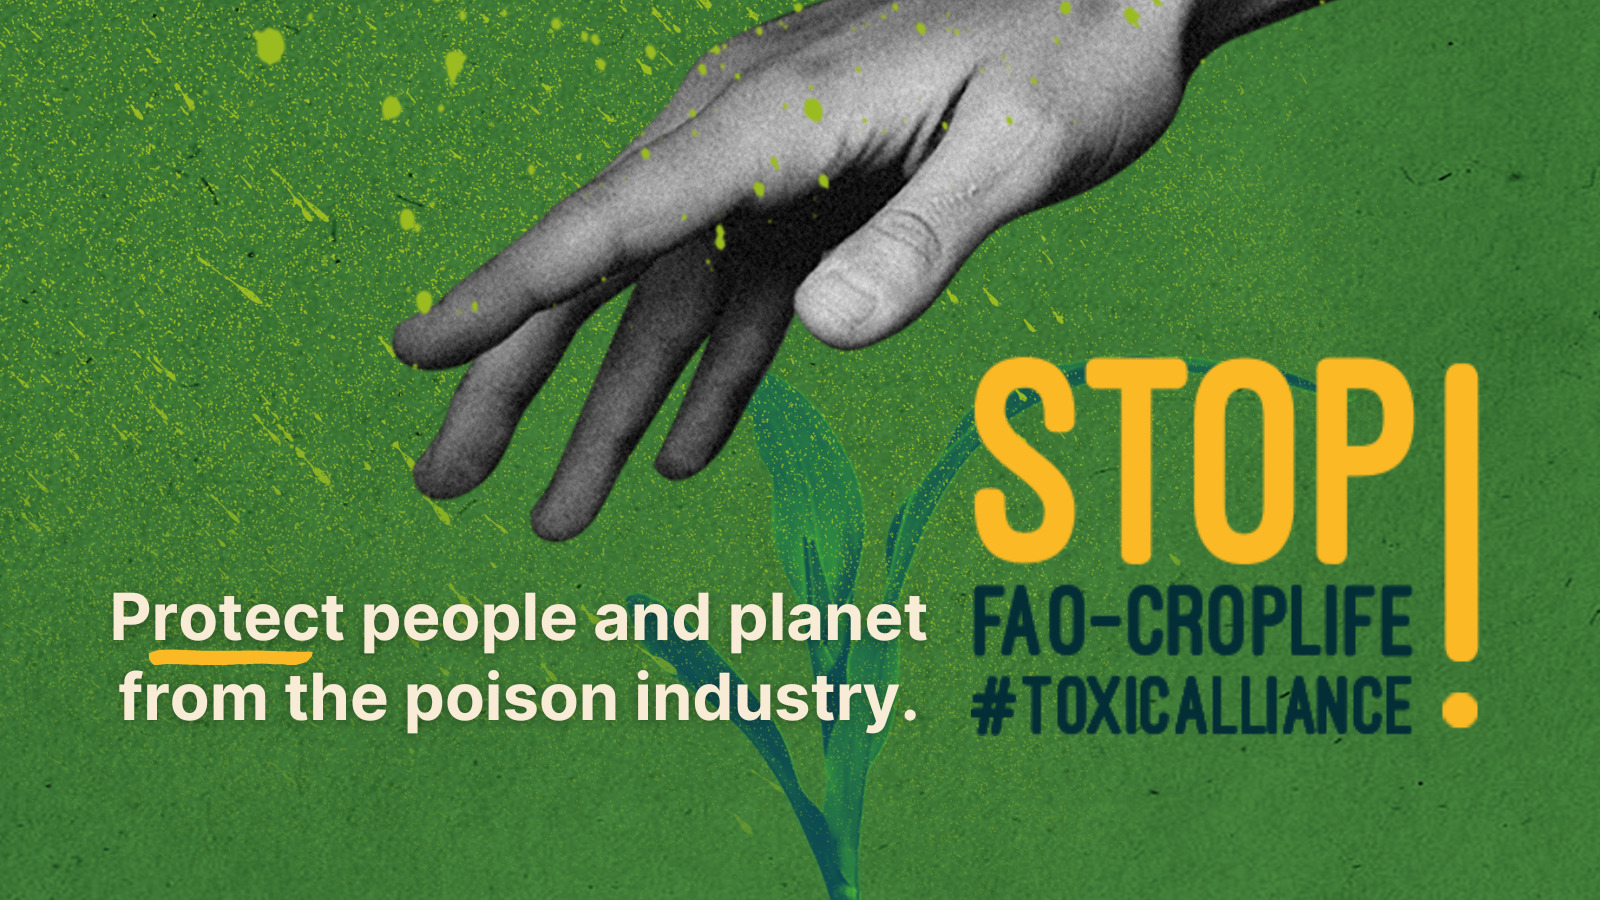 End the Toxic Alliance between FAO and the pesticide industry 